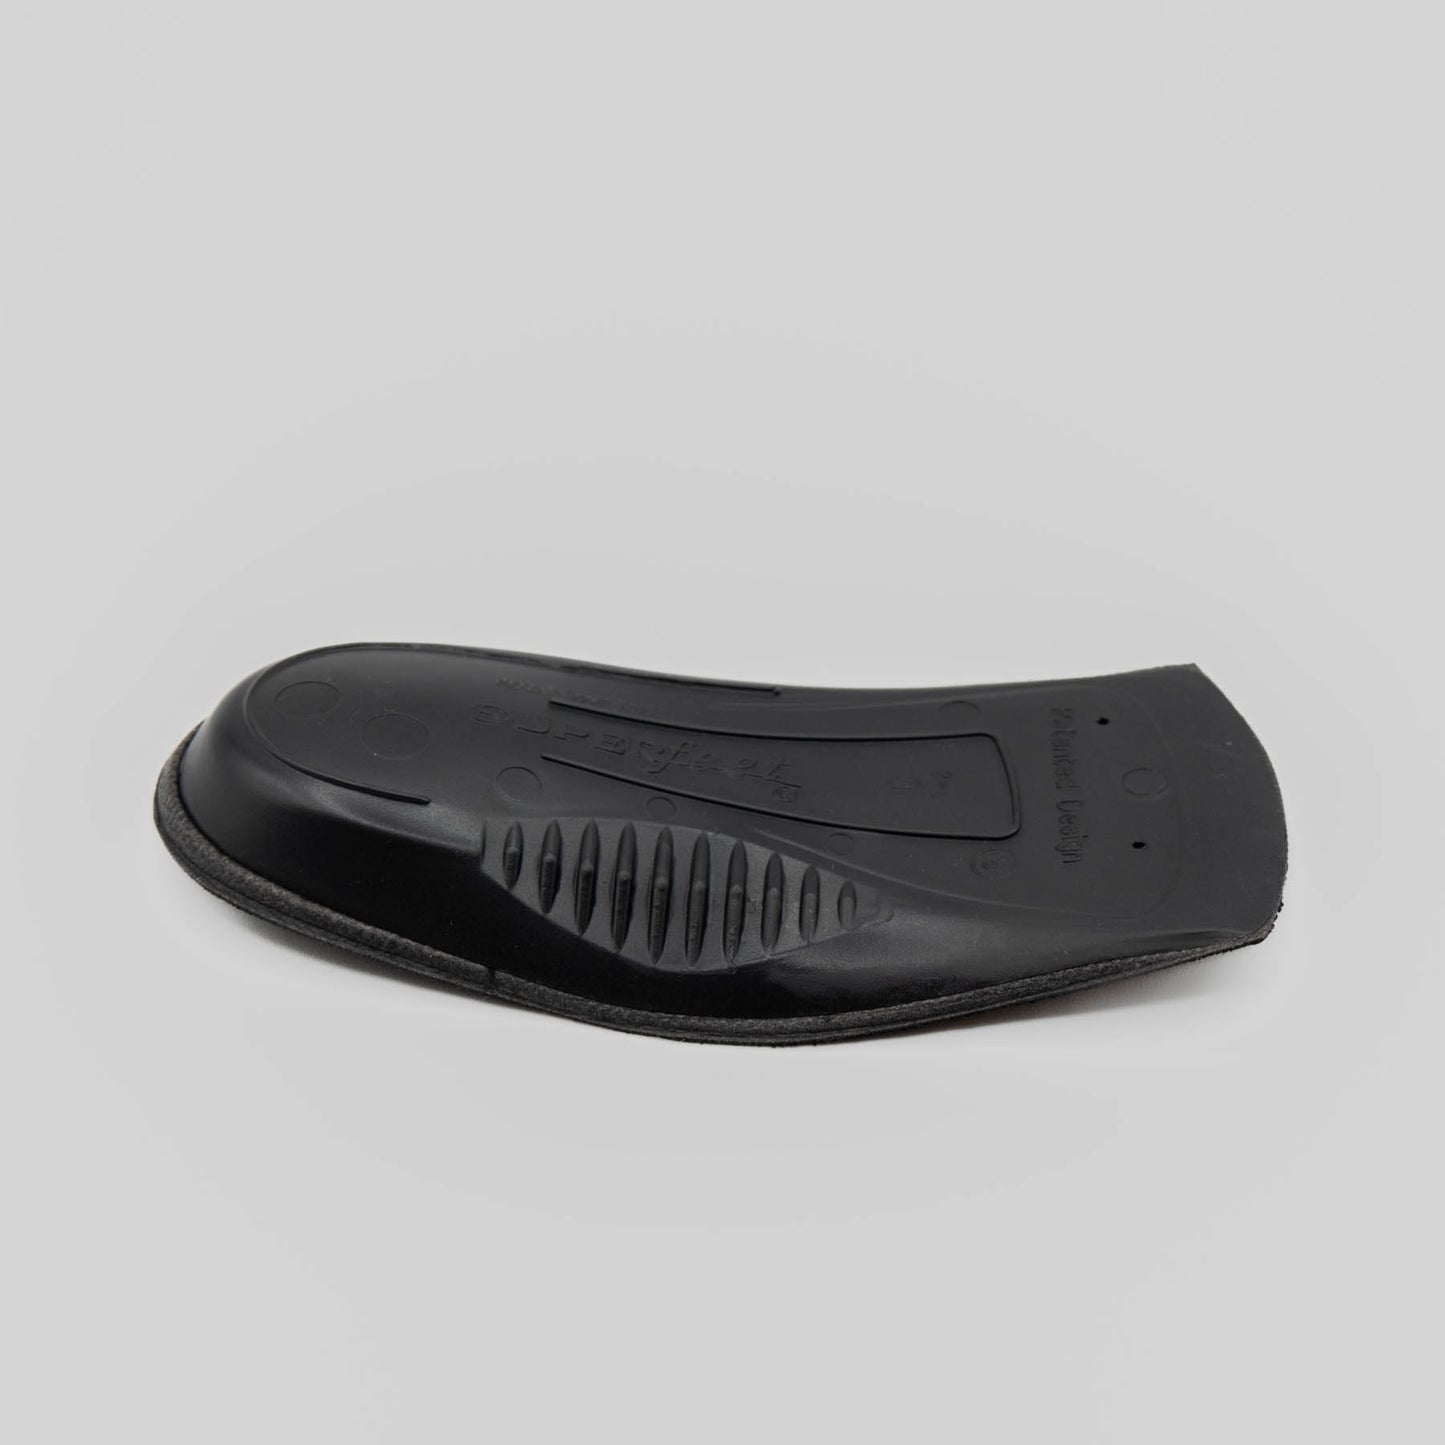 Superfeet -Size C  Black Male 6-1/2 to 8 Deluxe Flats Insoles - Black